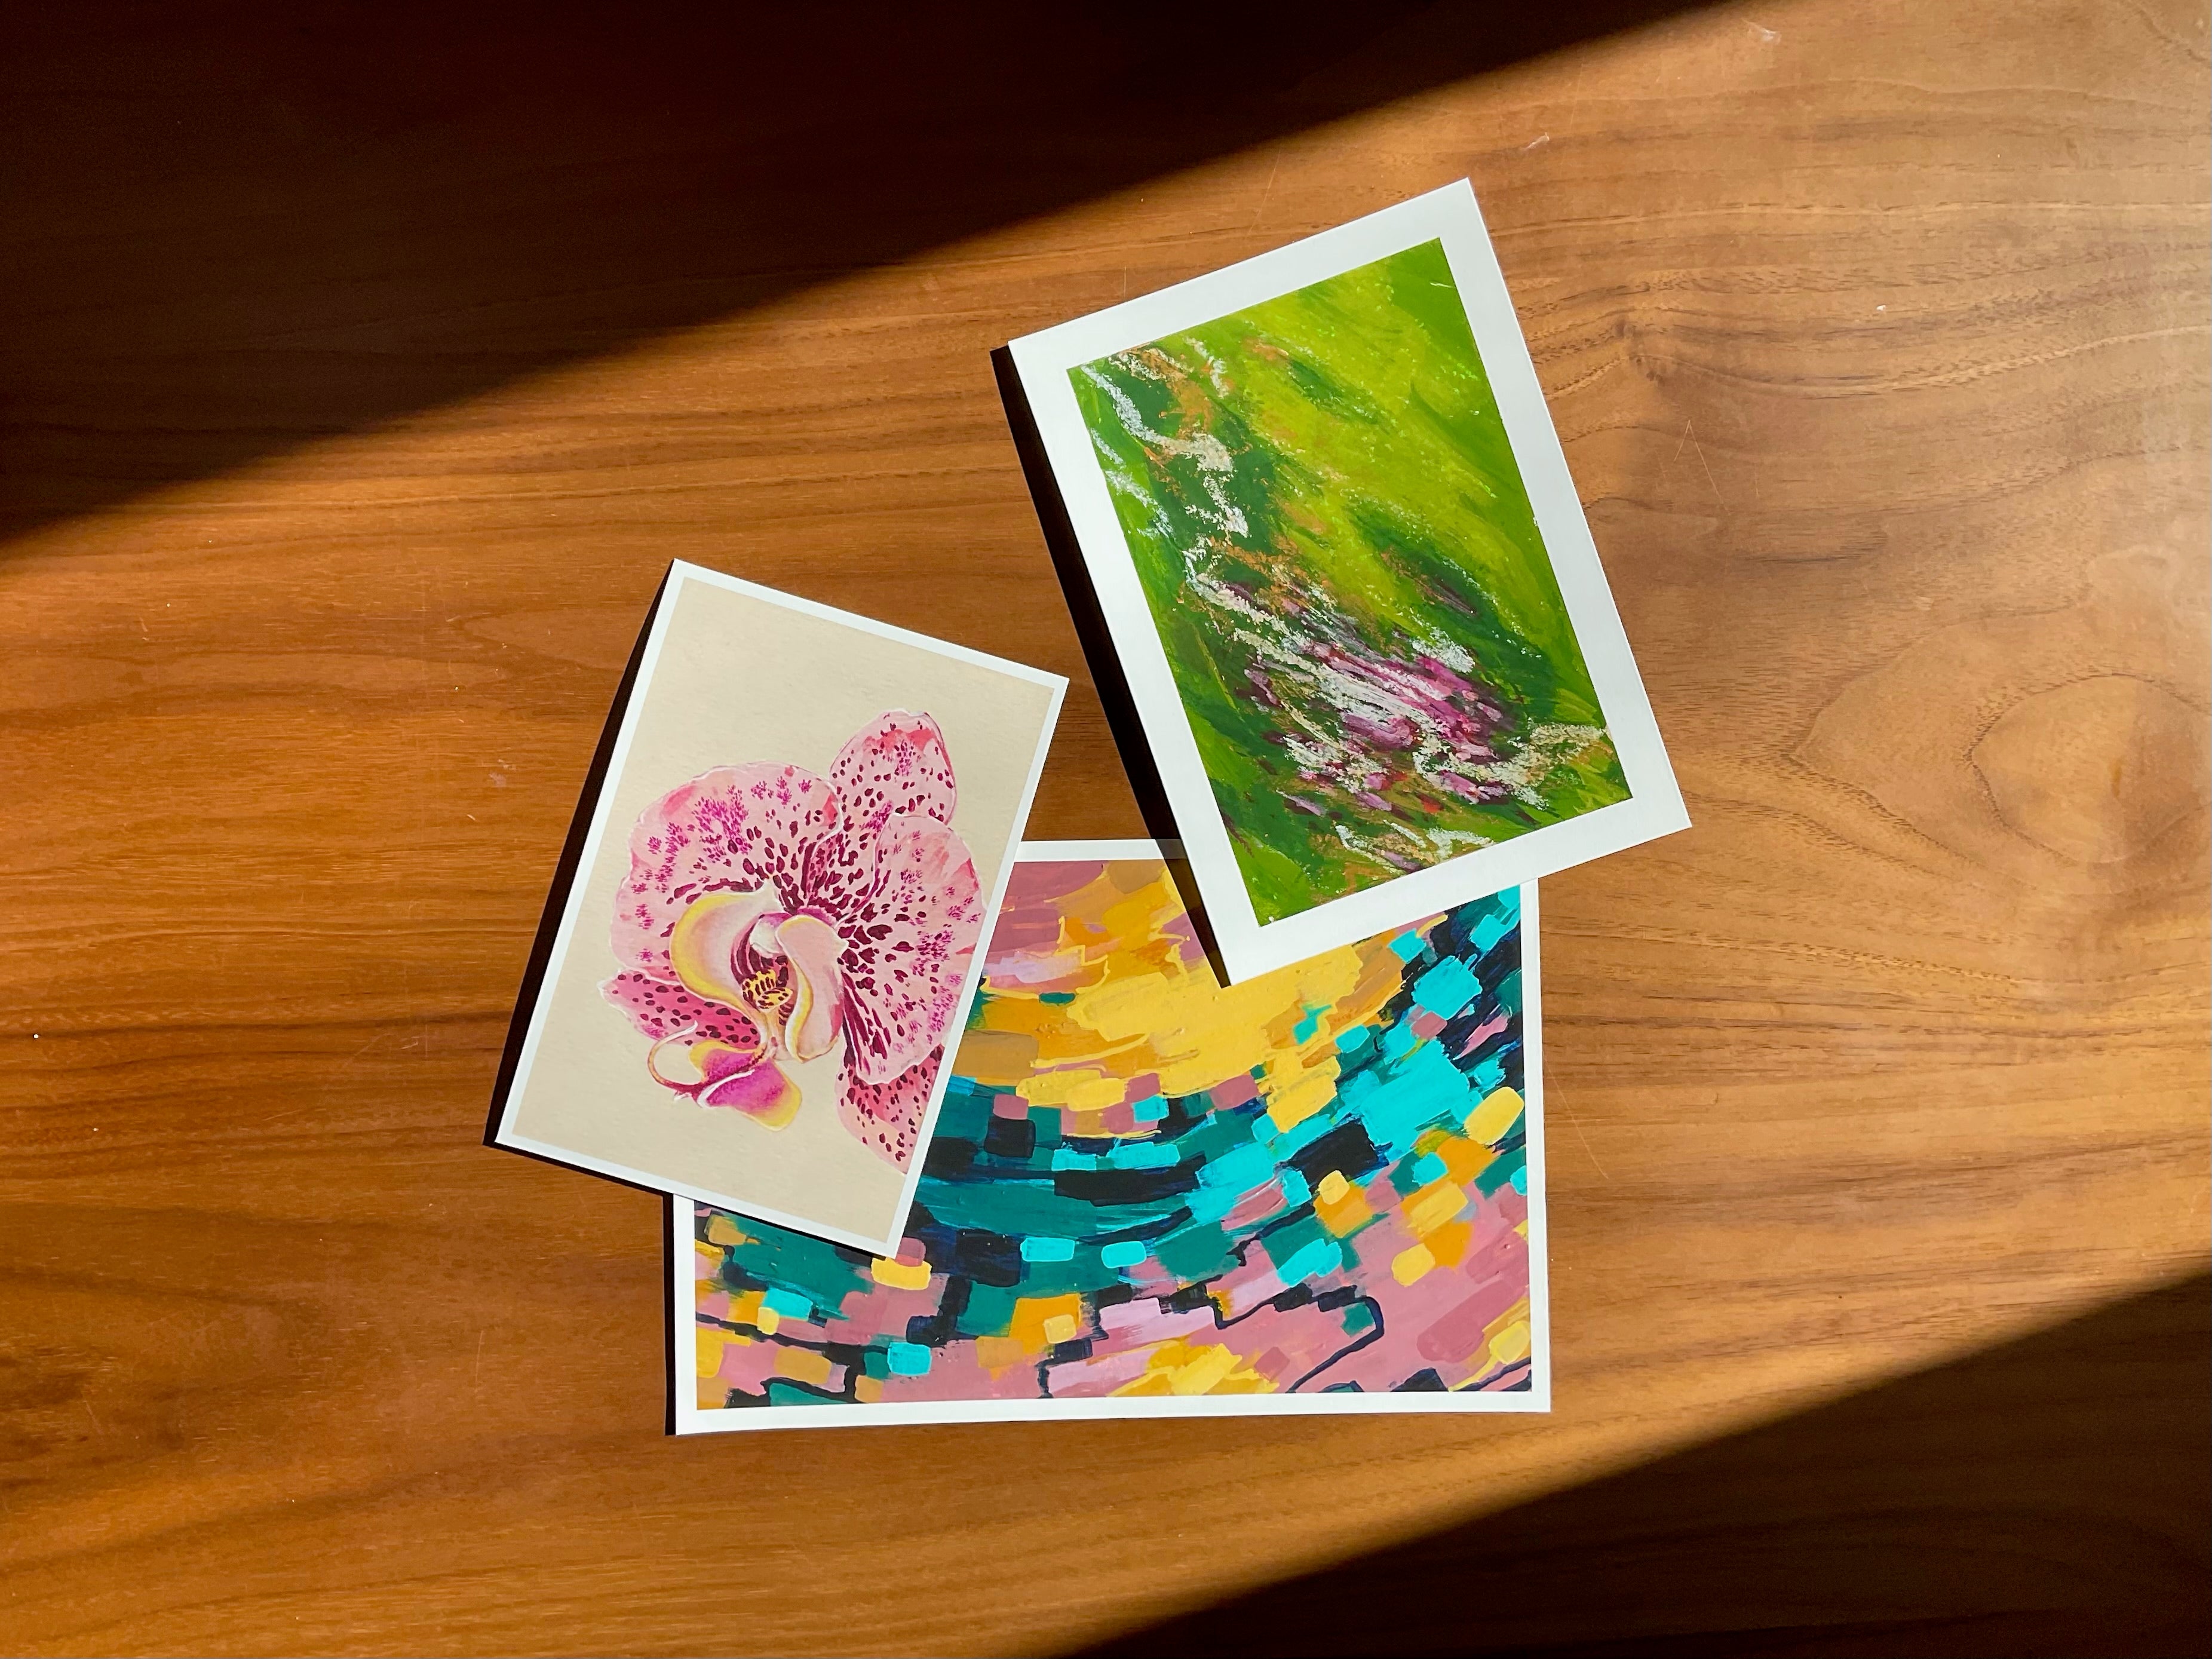 Three art prints on a wooden surface, sunlight washing over them.